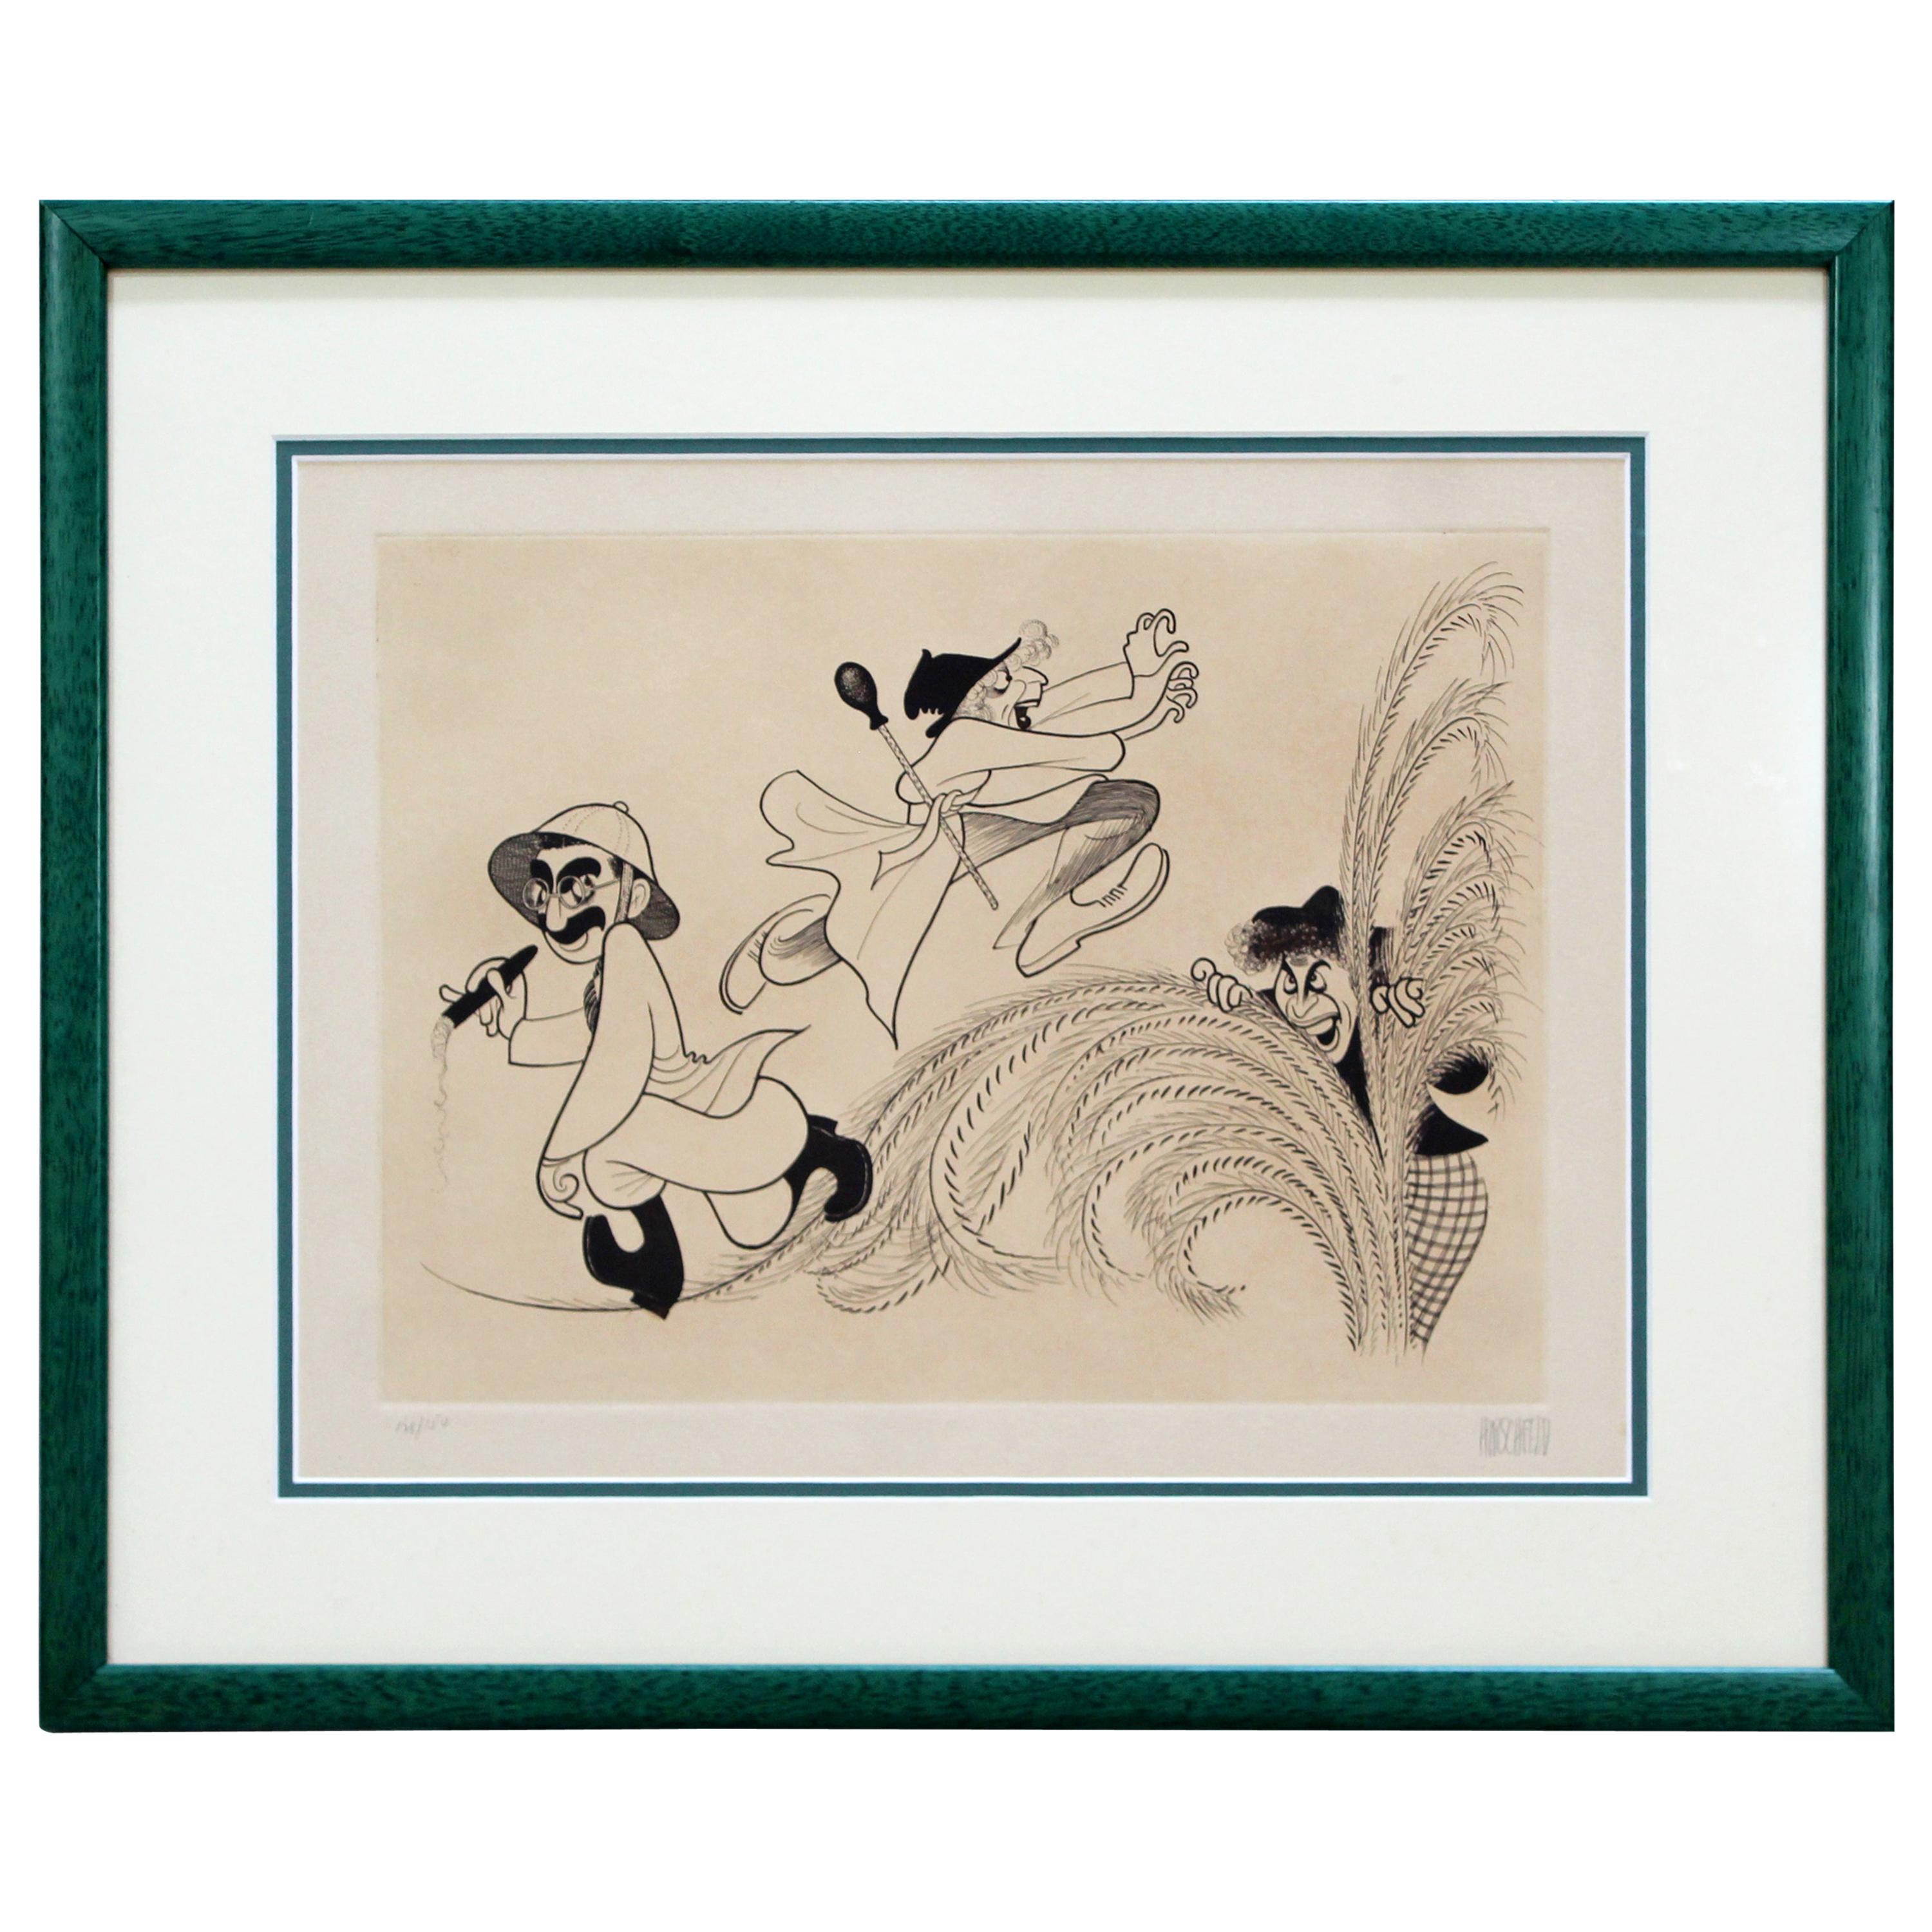 Contemporary Modern Marx Brothers Framed Lithograph Signed Al Hirschfeld 128/150